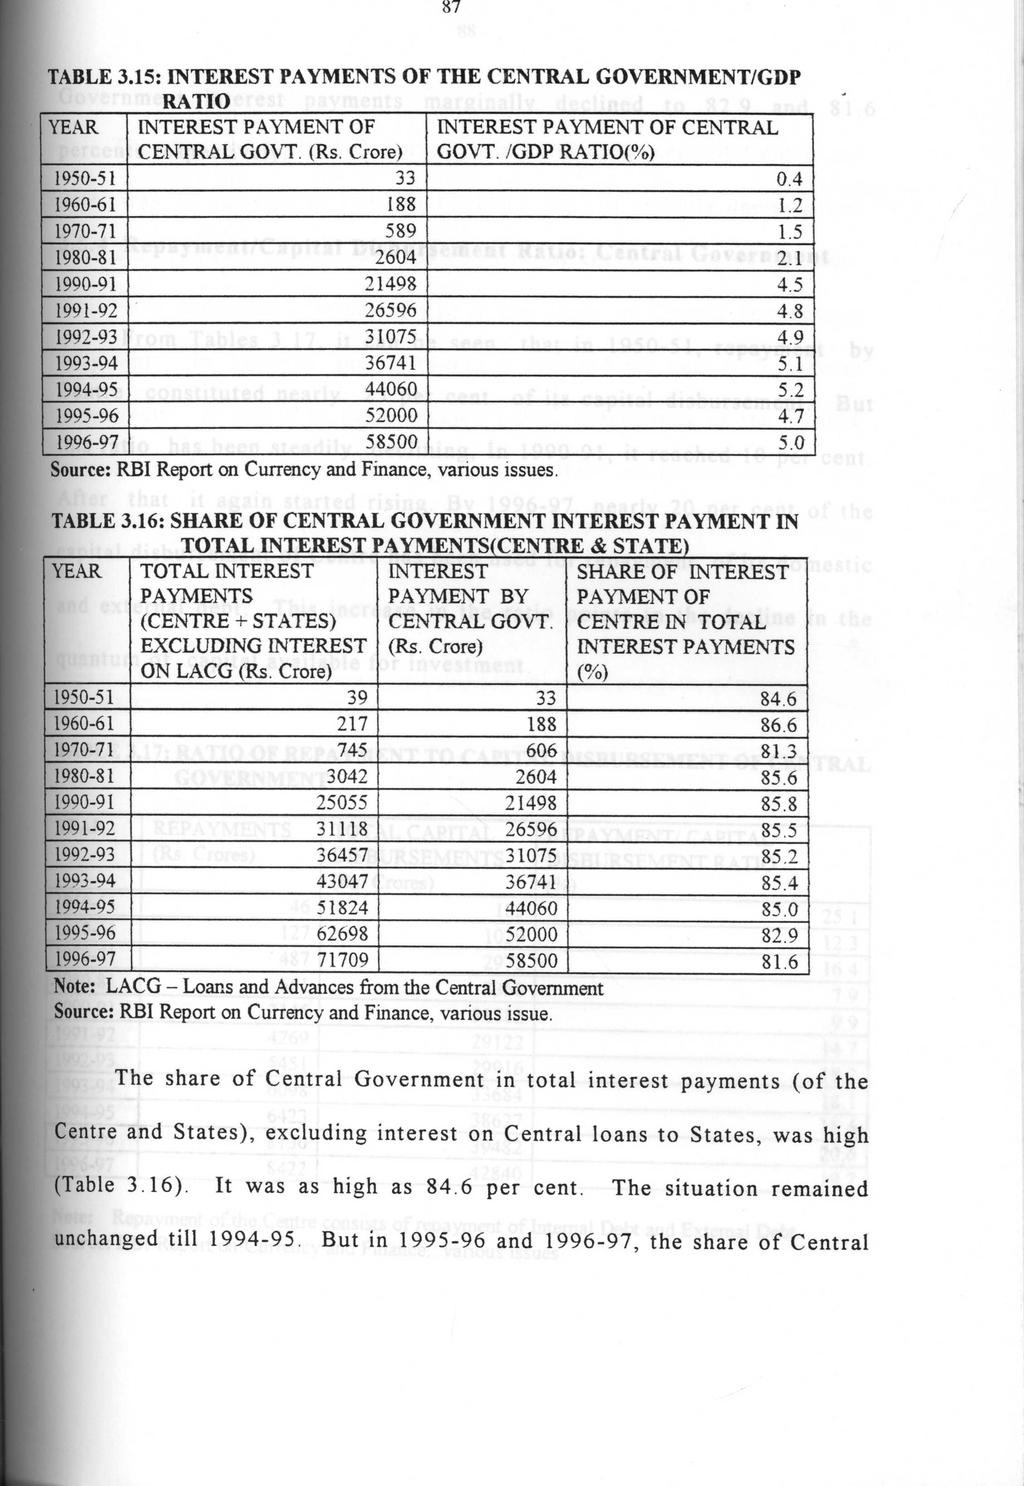 87 TABLE 3.15: INTEREST PAYMENTS OF THE CENTRAL GOVERNMENT/GDP RATIO YEAR INTEREST PAYMENT OF CENTRAL GOVT. (Rs. Crore) INTEREST PAYMENT OF CENTRAL GOVT. /GDP RATIO(%) 1950-51 33 0.4 1960-61 188 1.